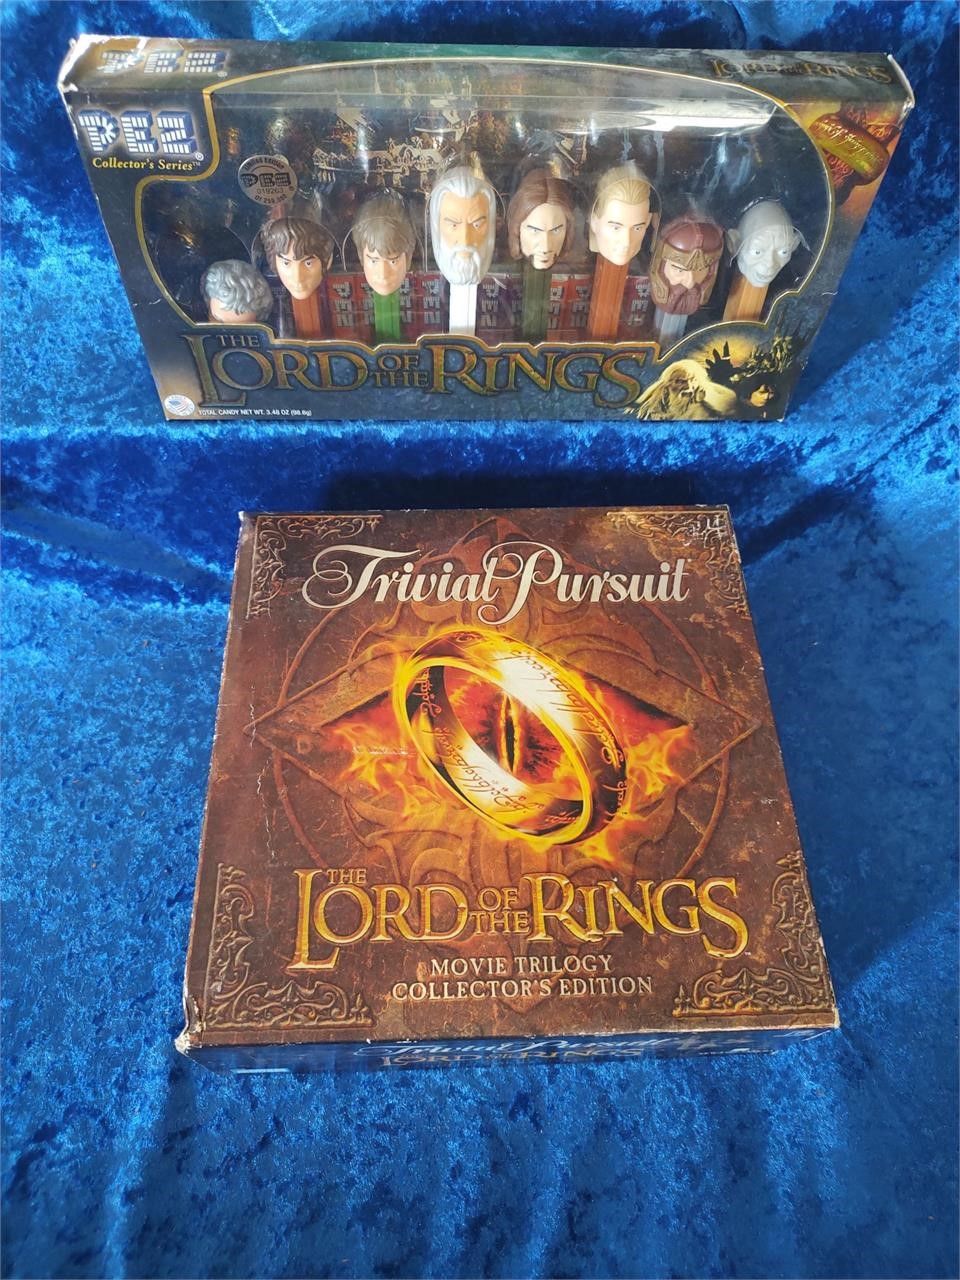 Lord of the Rings pezz dispenser+ trivia pursuit